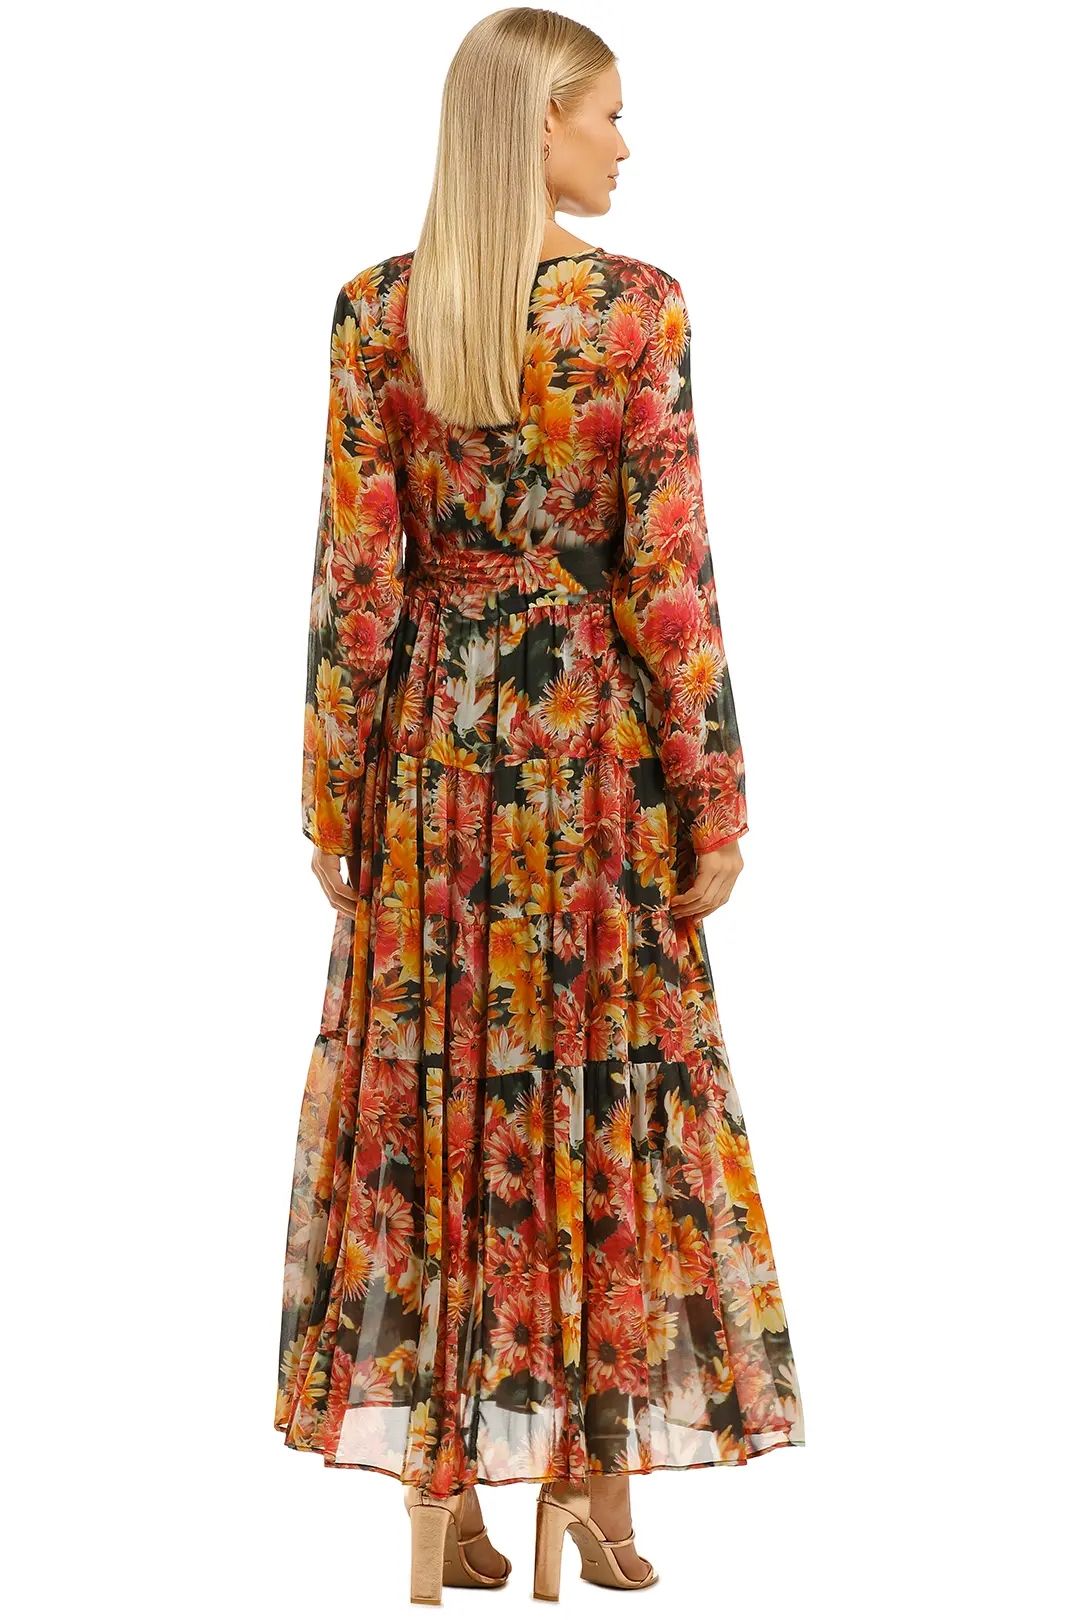 Curate-by-Trelise-Cooper-Dont-Get-Me-Long-Dress-Flower-Back